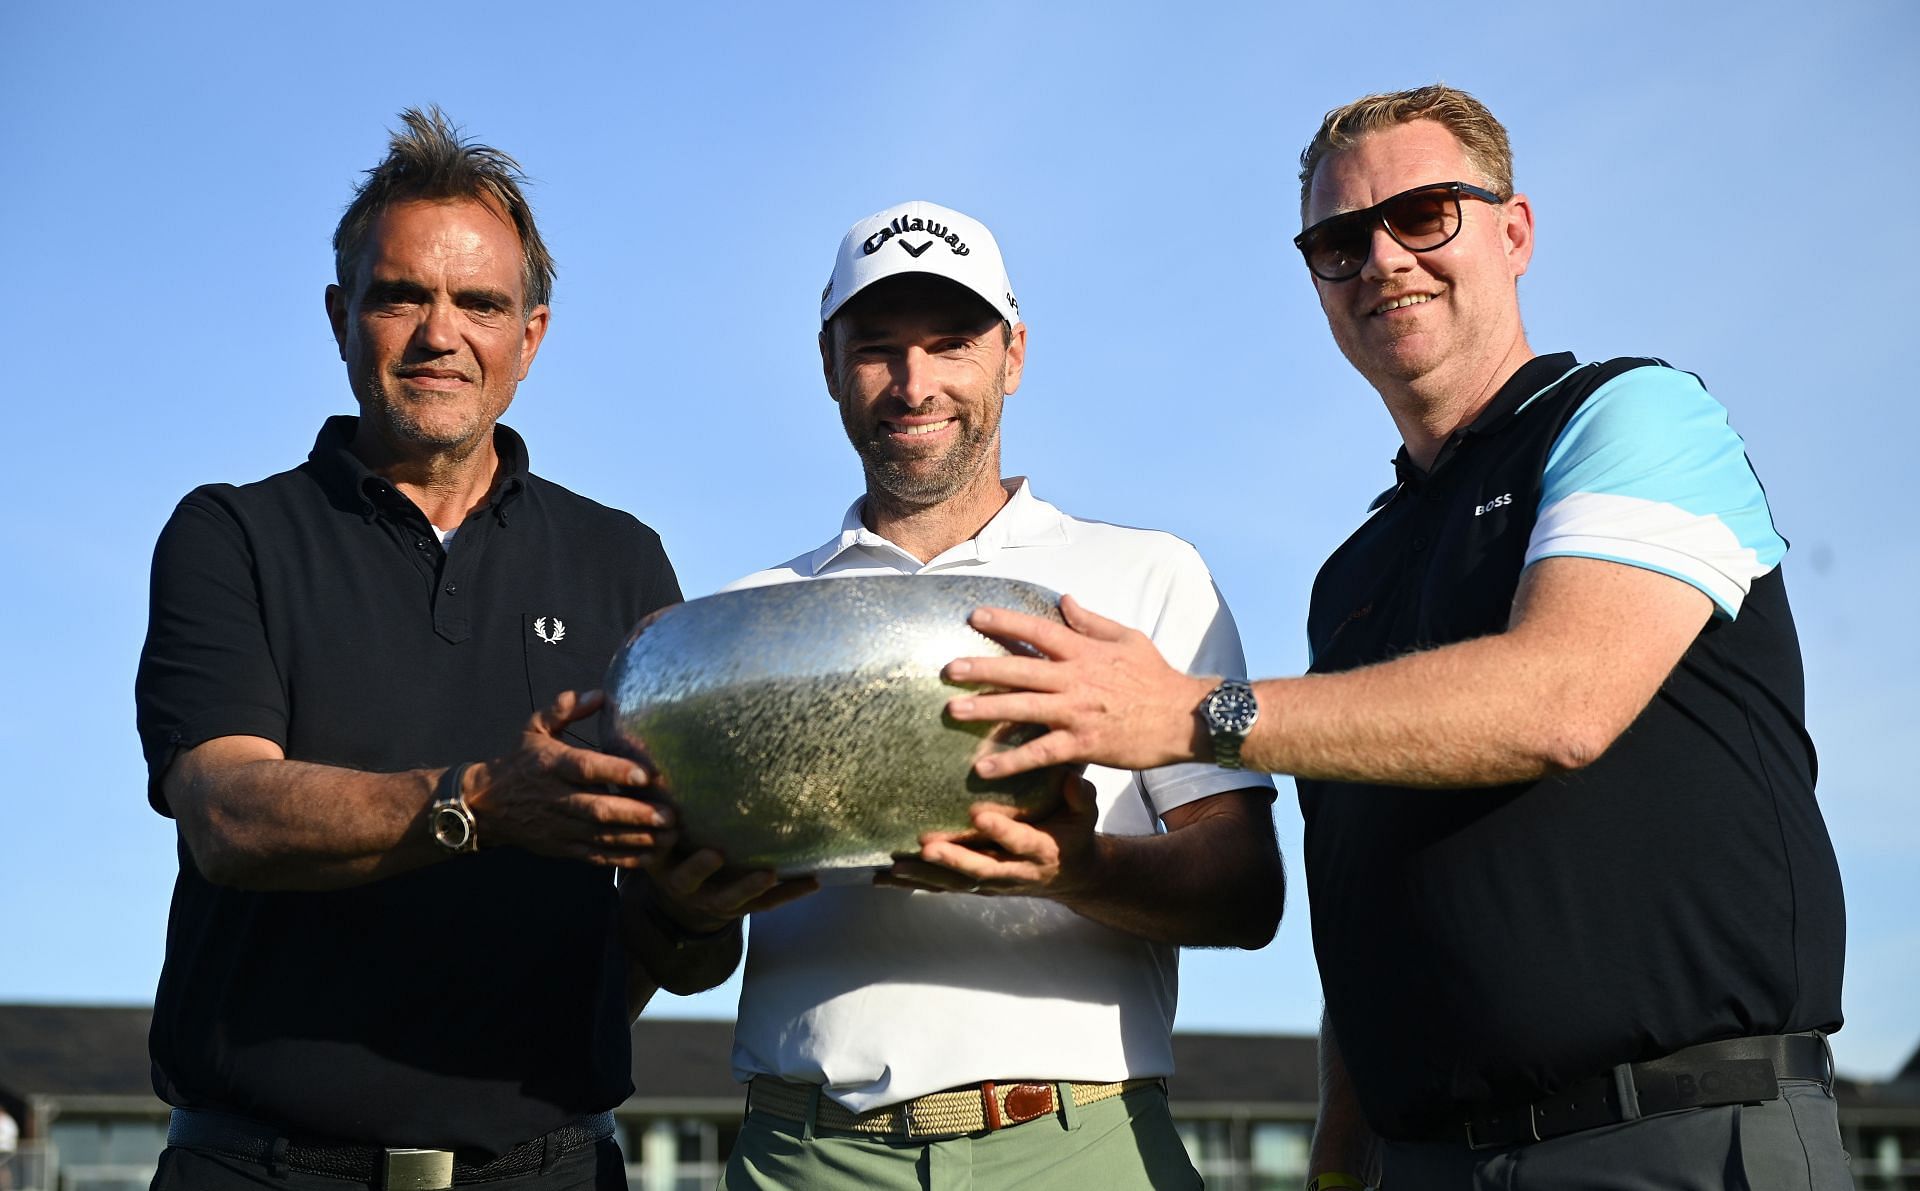 Made in HimmerLand - Day Four